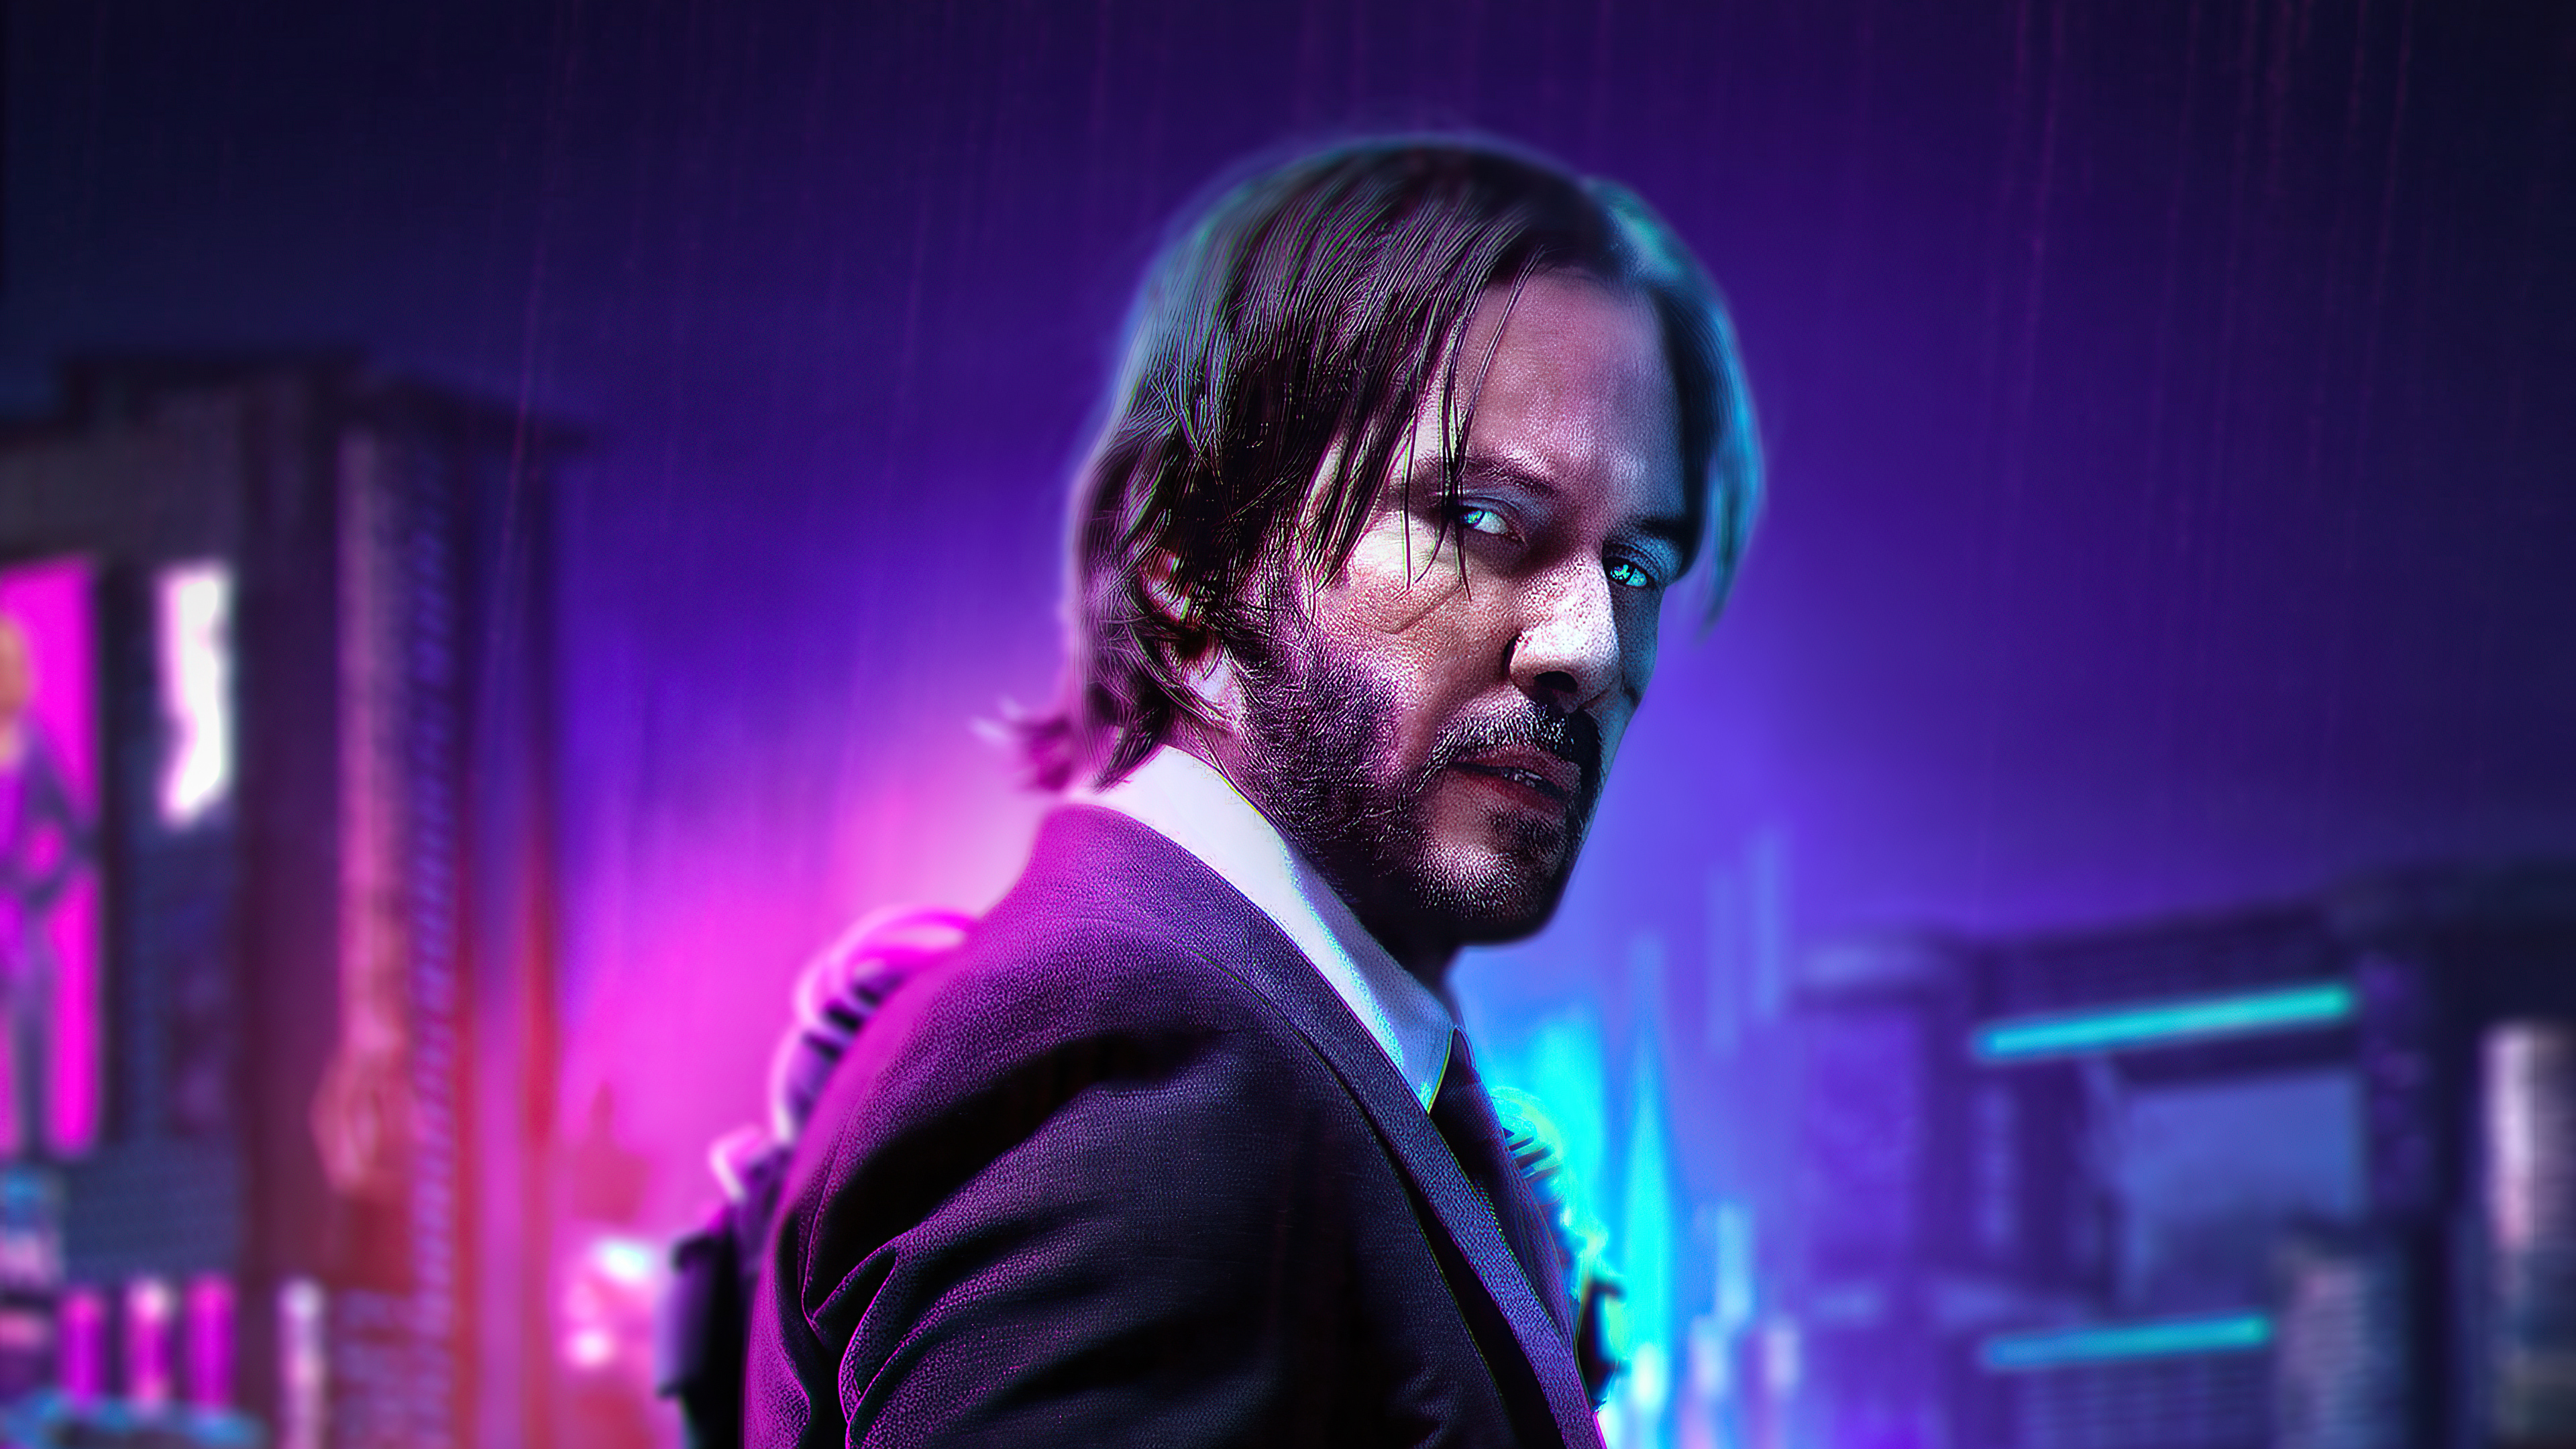 John Wick 2077 4k, HD Movies, 4k Wallpapers, Images, Backgrounds ...